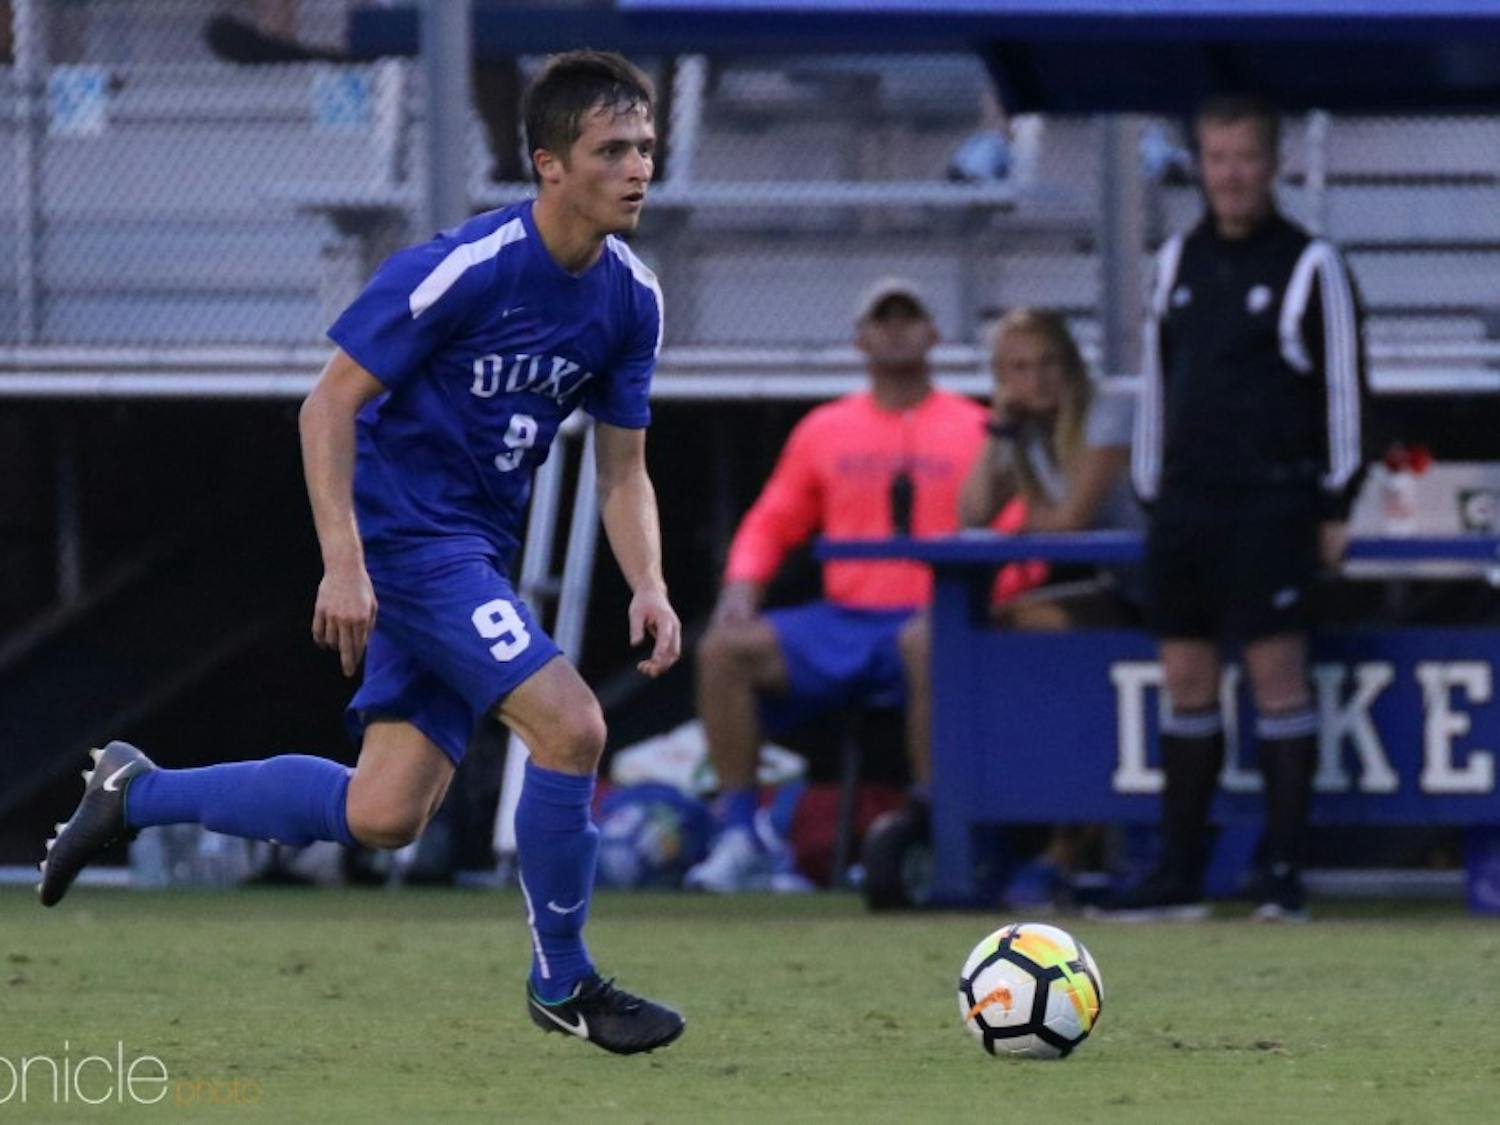 Daniele Proch buried a shot in the fourth minute to open the scoring for Duke Friday.